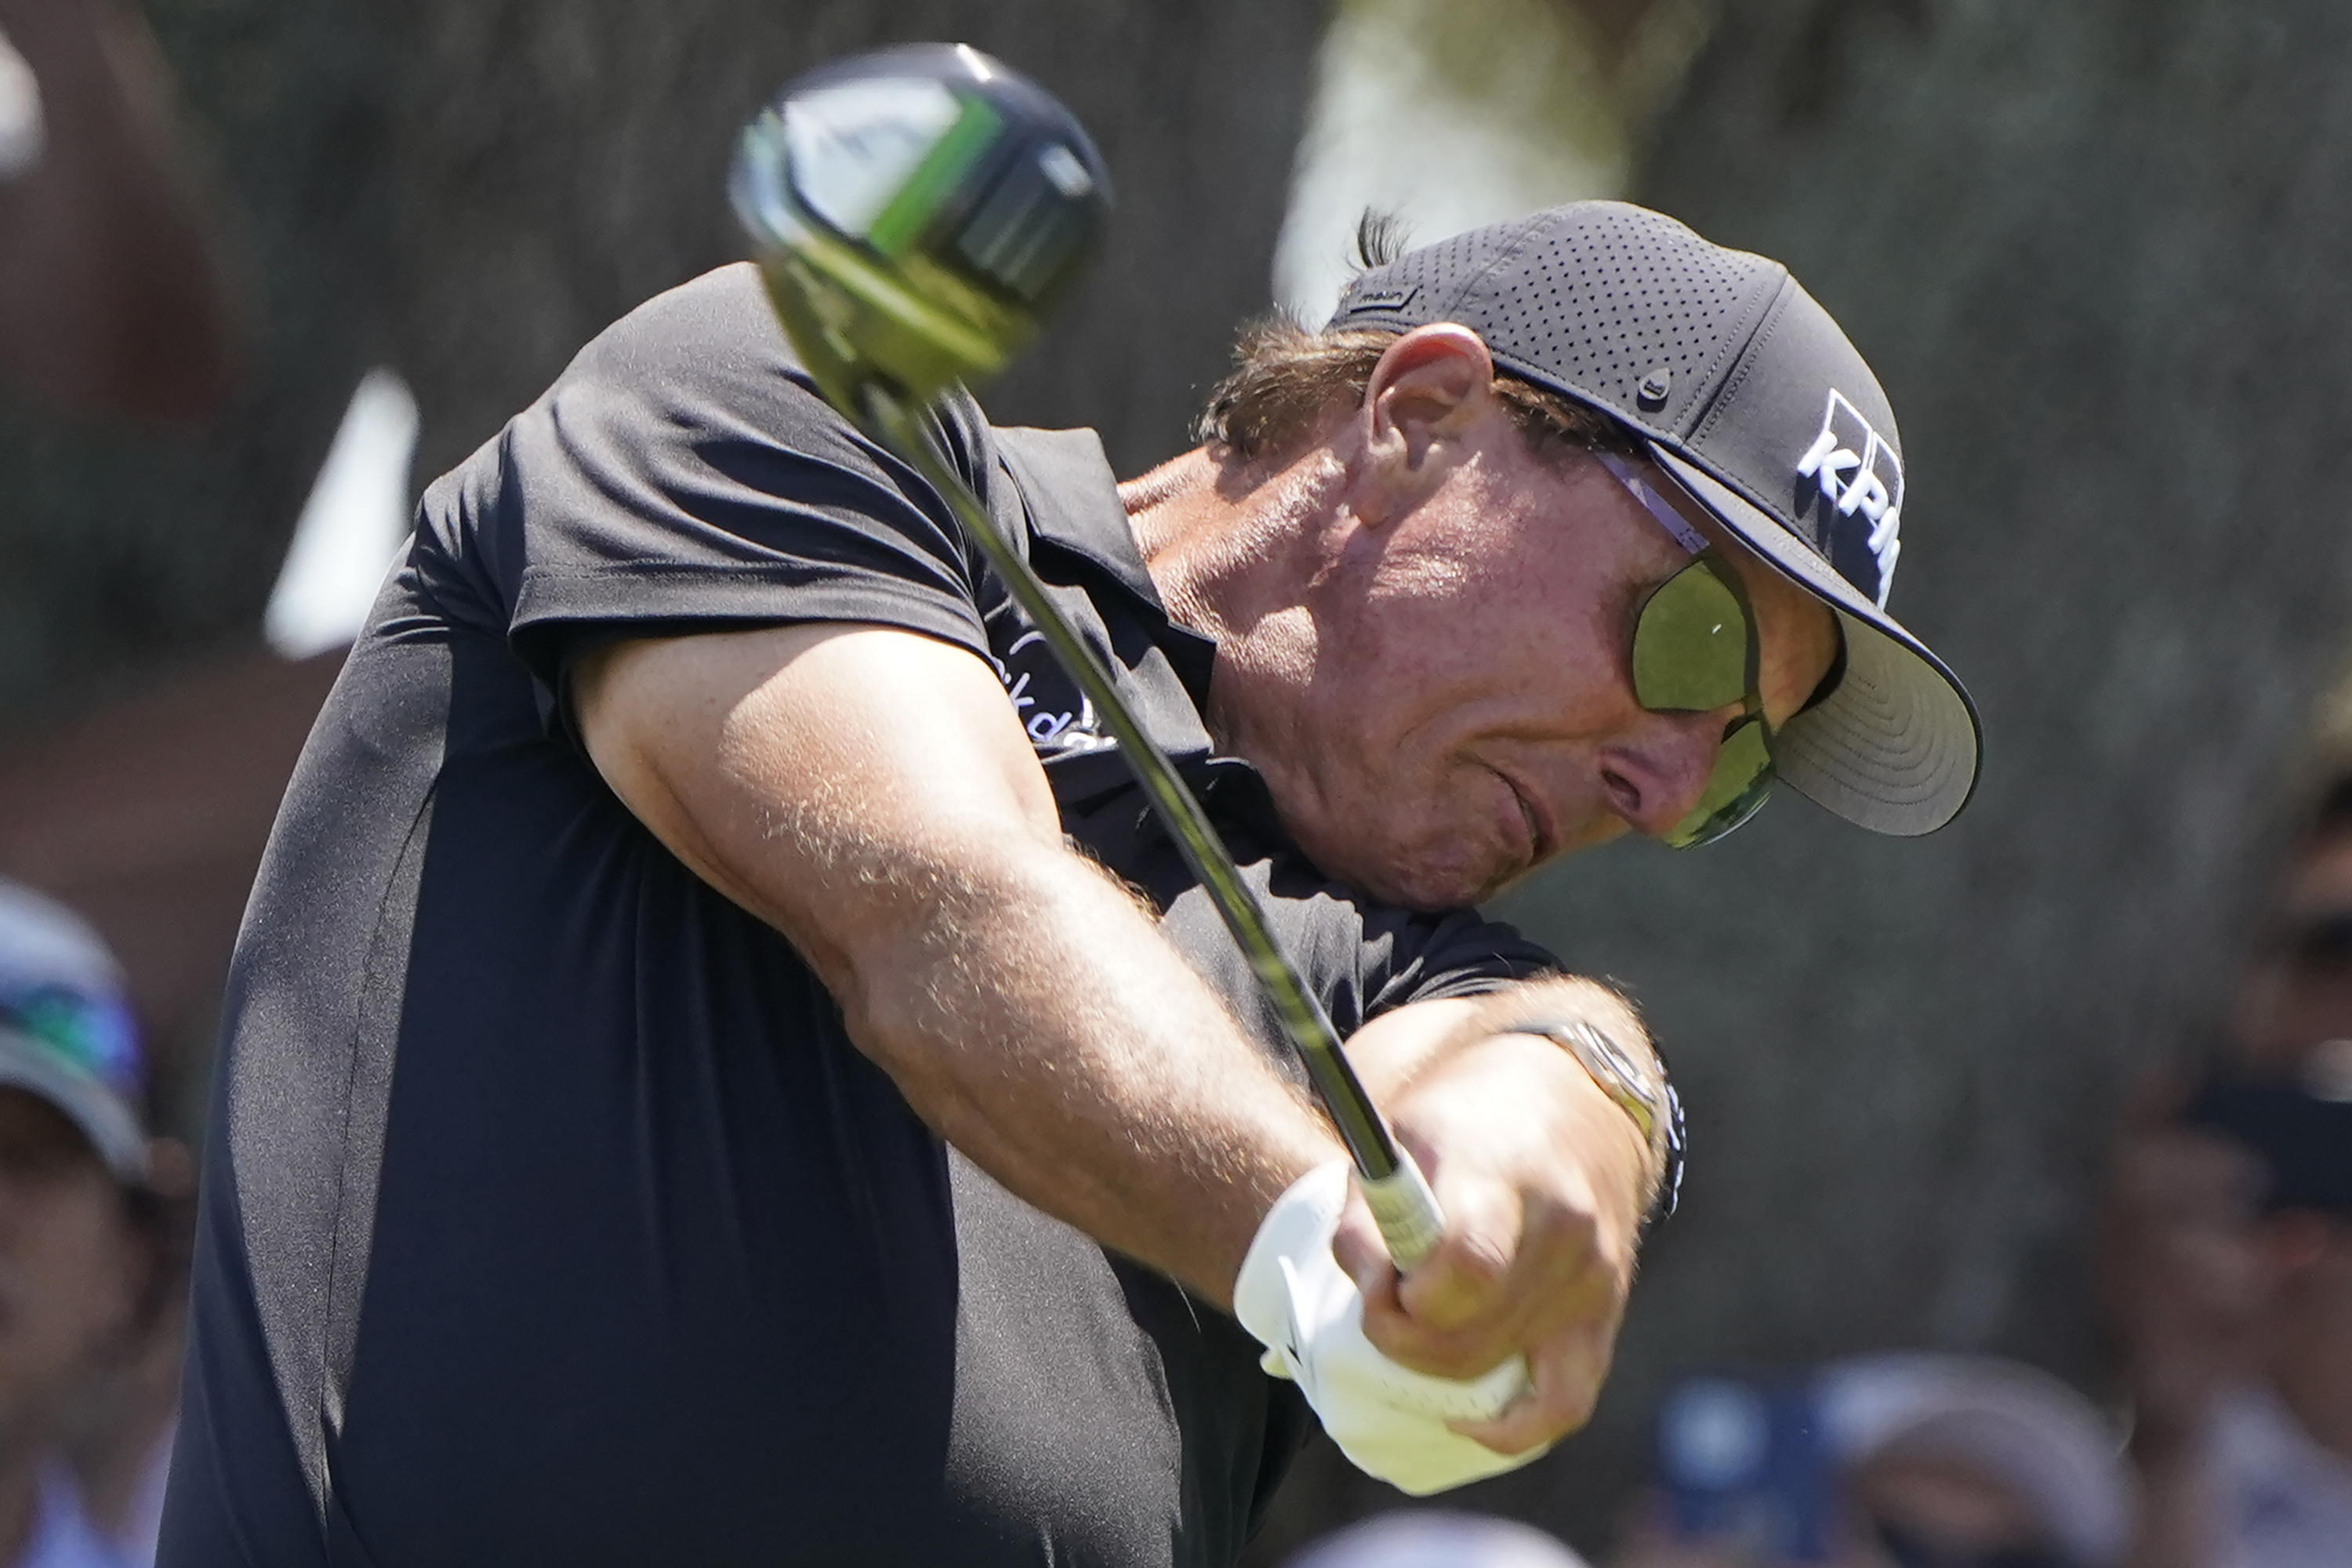 PGA Championship 2021 Round 3 free live stream (5/22/21) How to watch, golf tee times, live updates Phil Mickelson